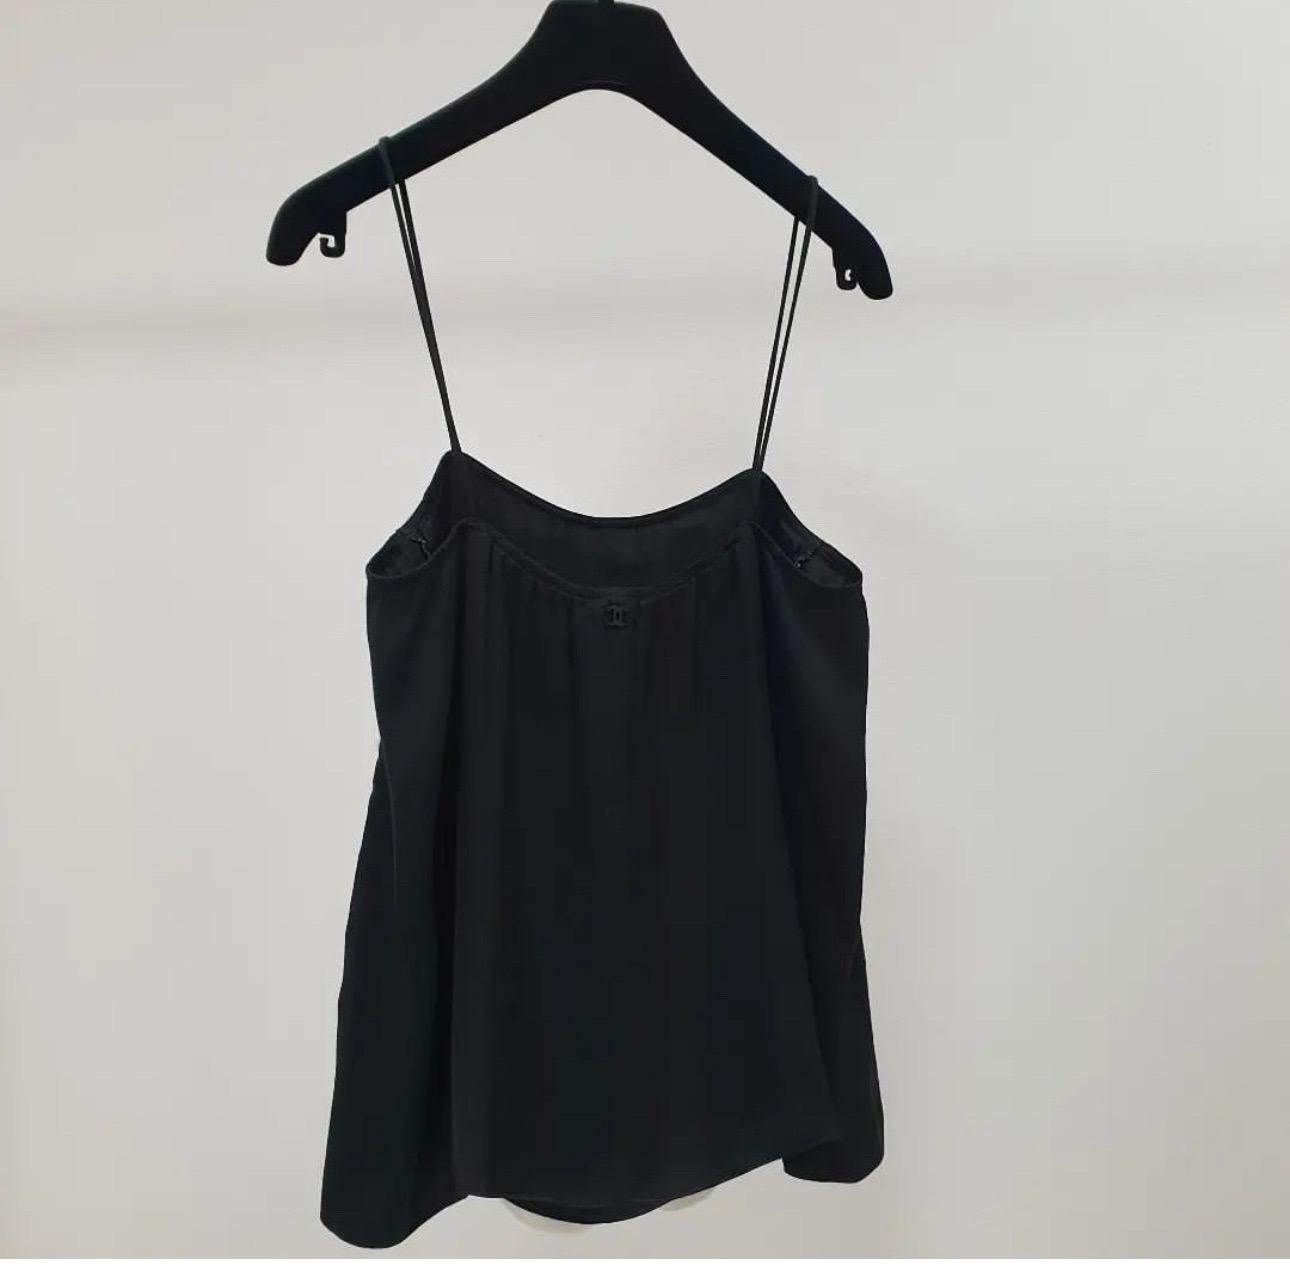 Pre-owned used camisole by CHANEL in good condition

Sz.38